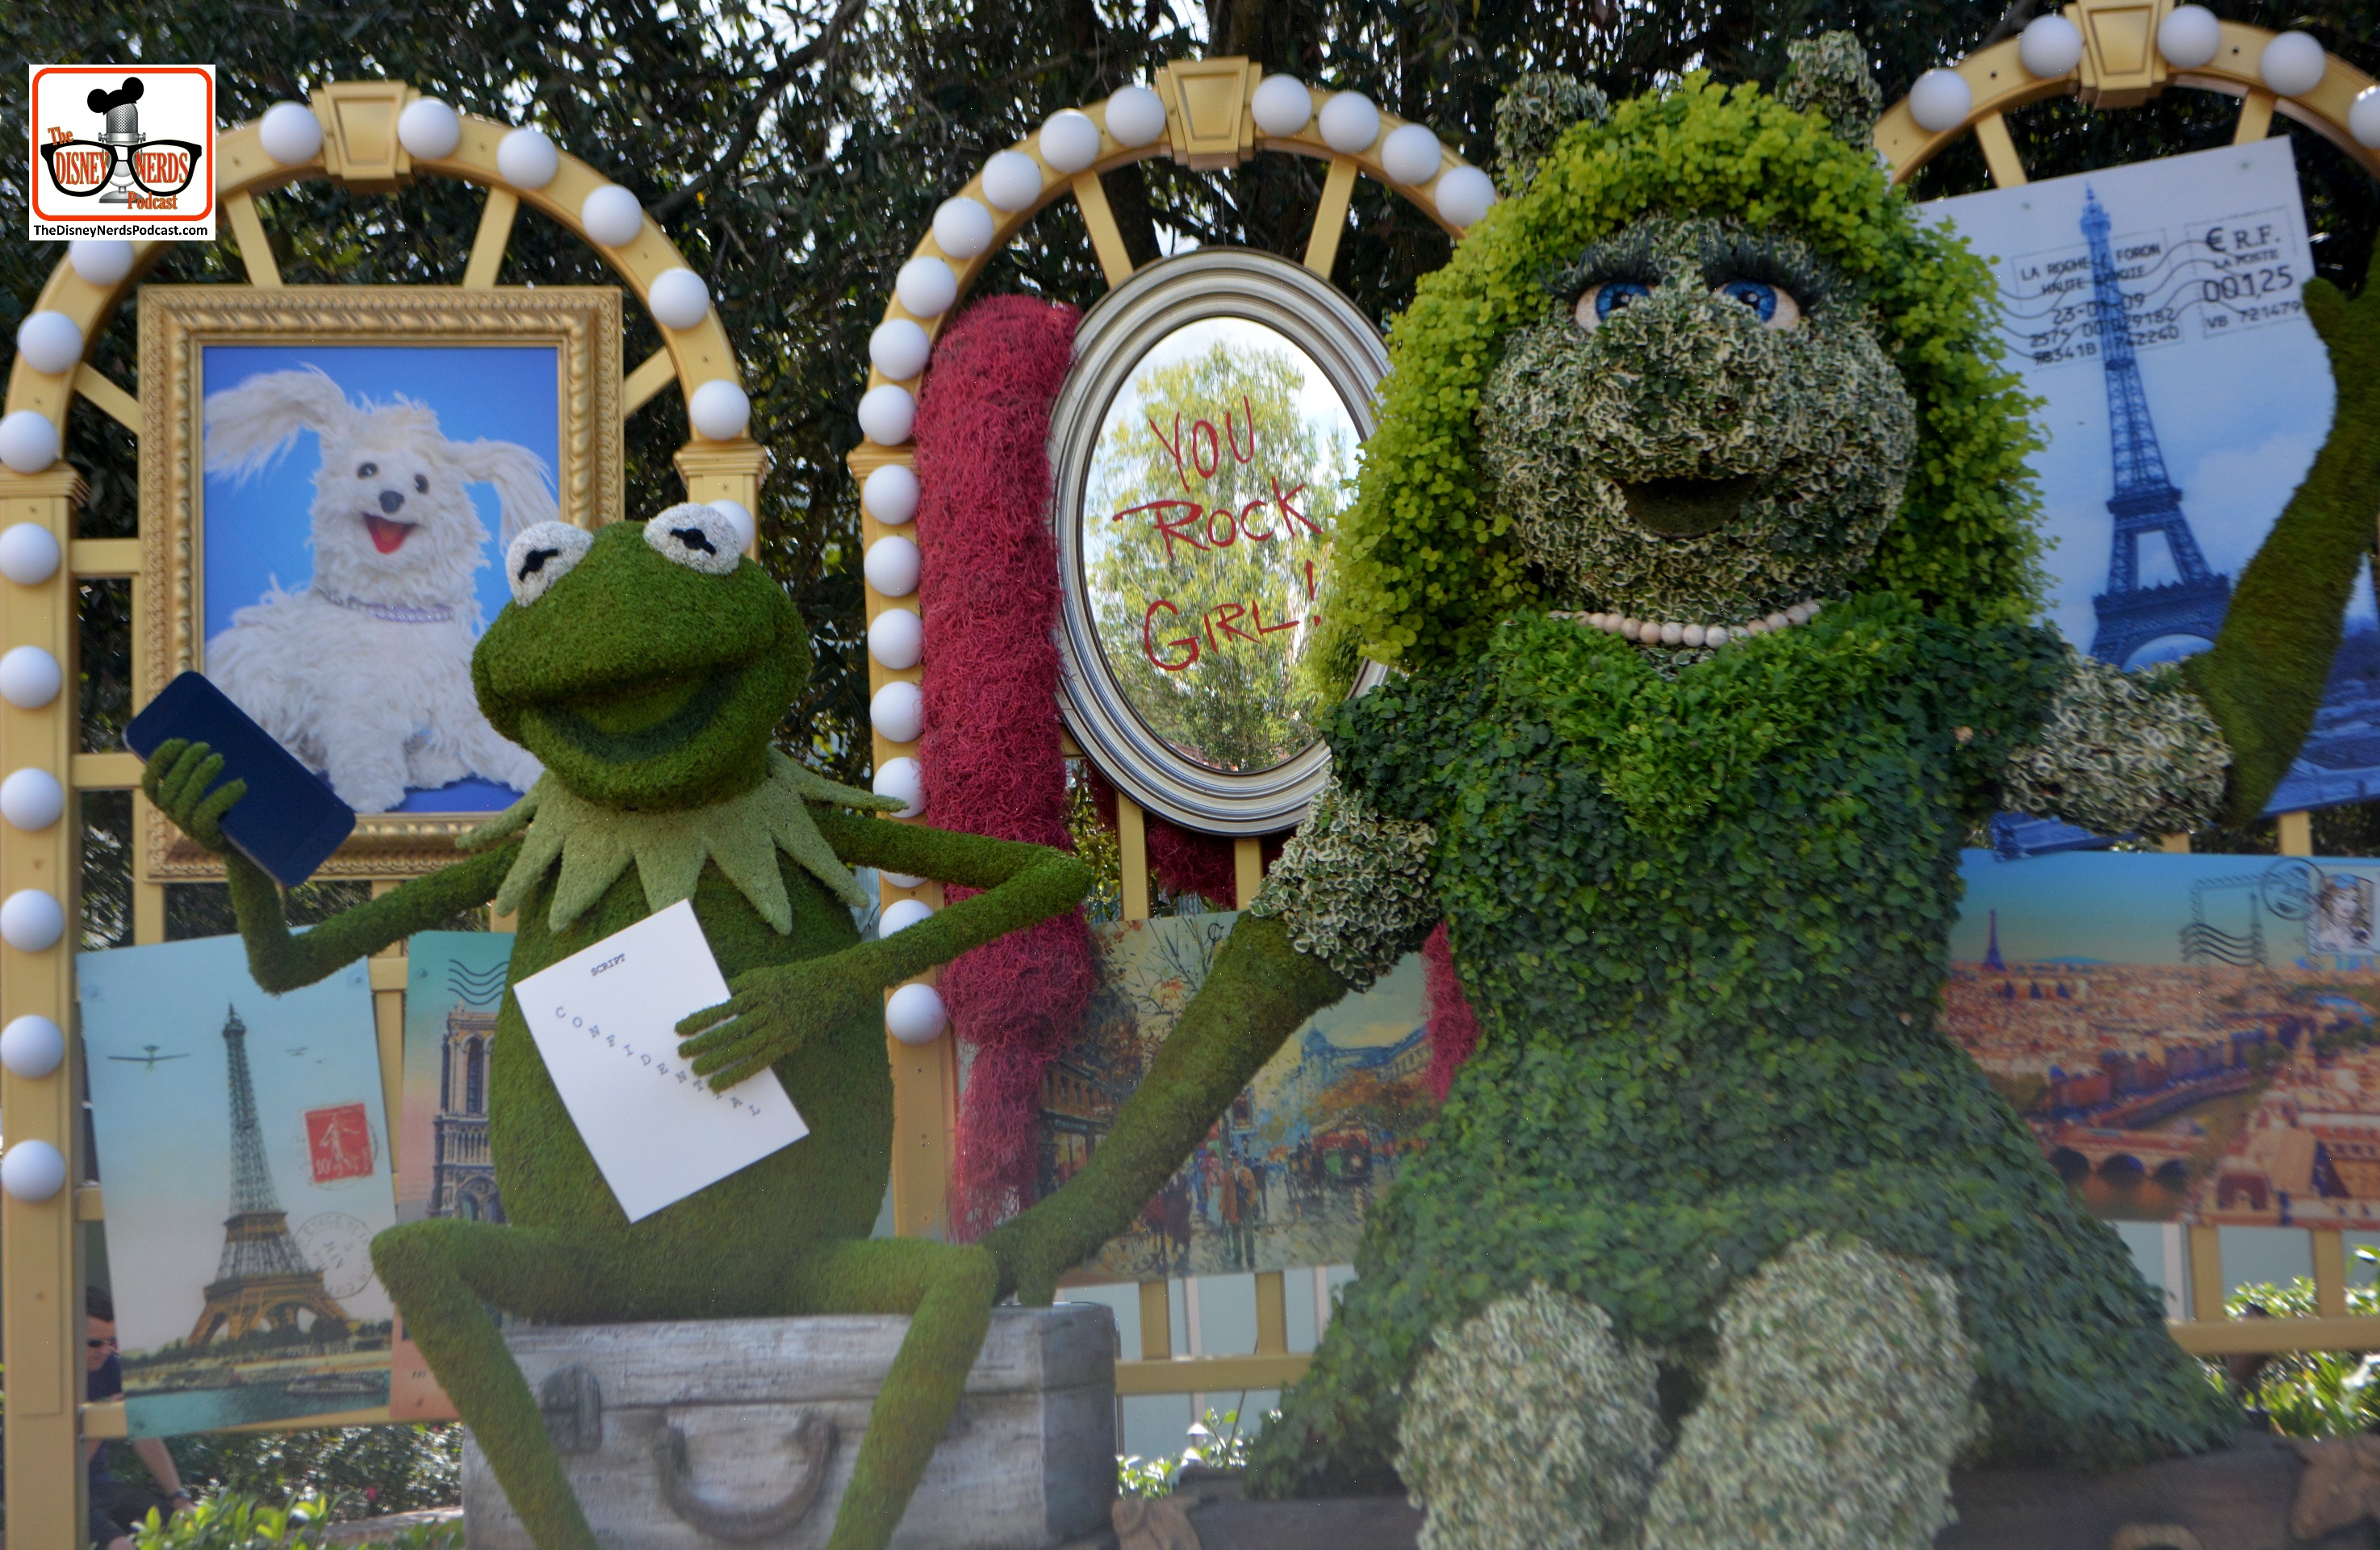 Kermit and Ms. Piggly topiary's from Flower and Garden have found a home at Disney Springs... Promoting the new ABC TV Show... Could they be getting back together???